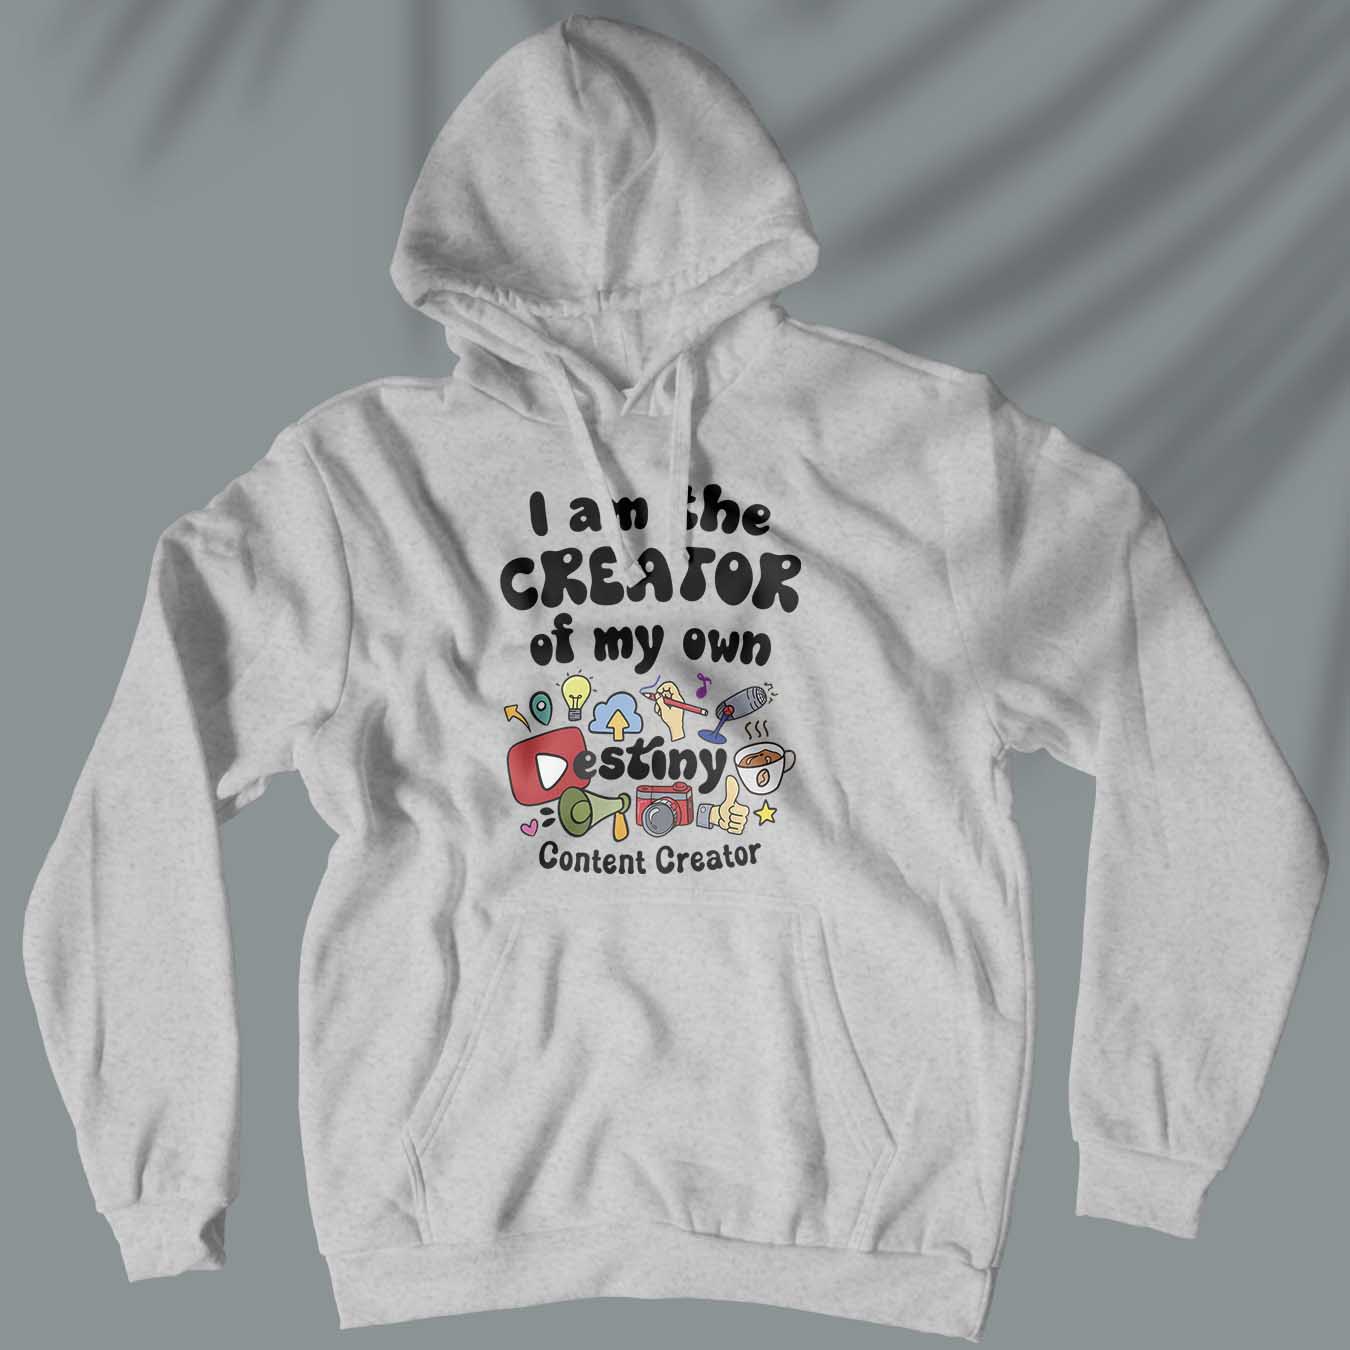 I Am The Creator Of My Own Destiny - Content Creator - Unisex Hoodie